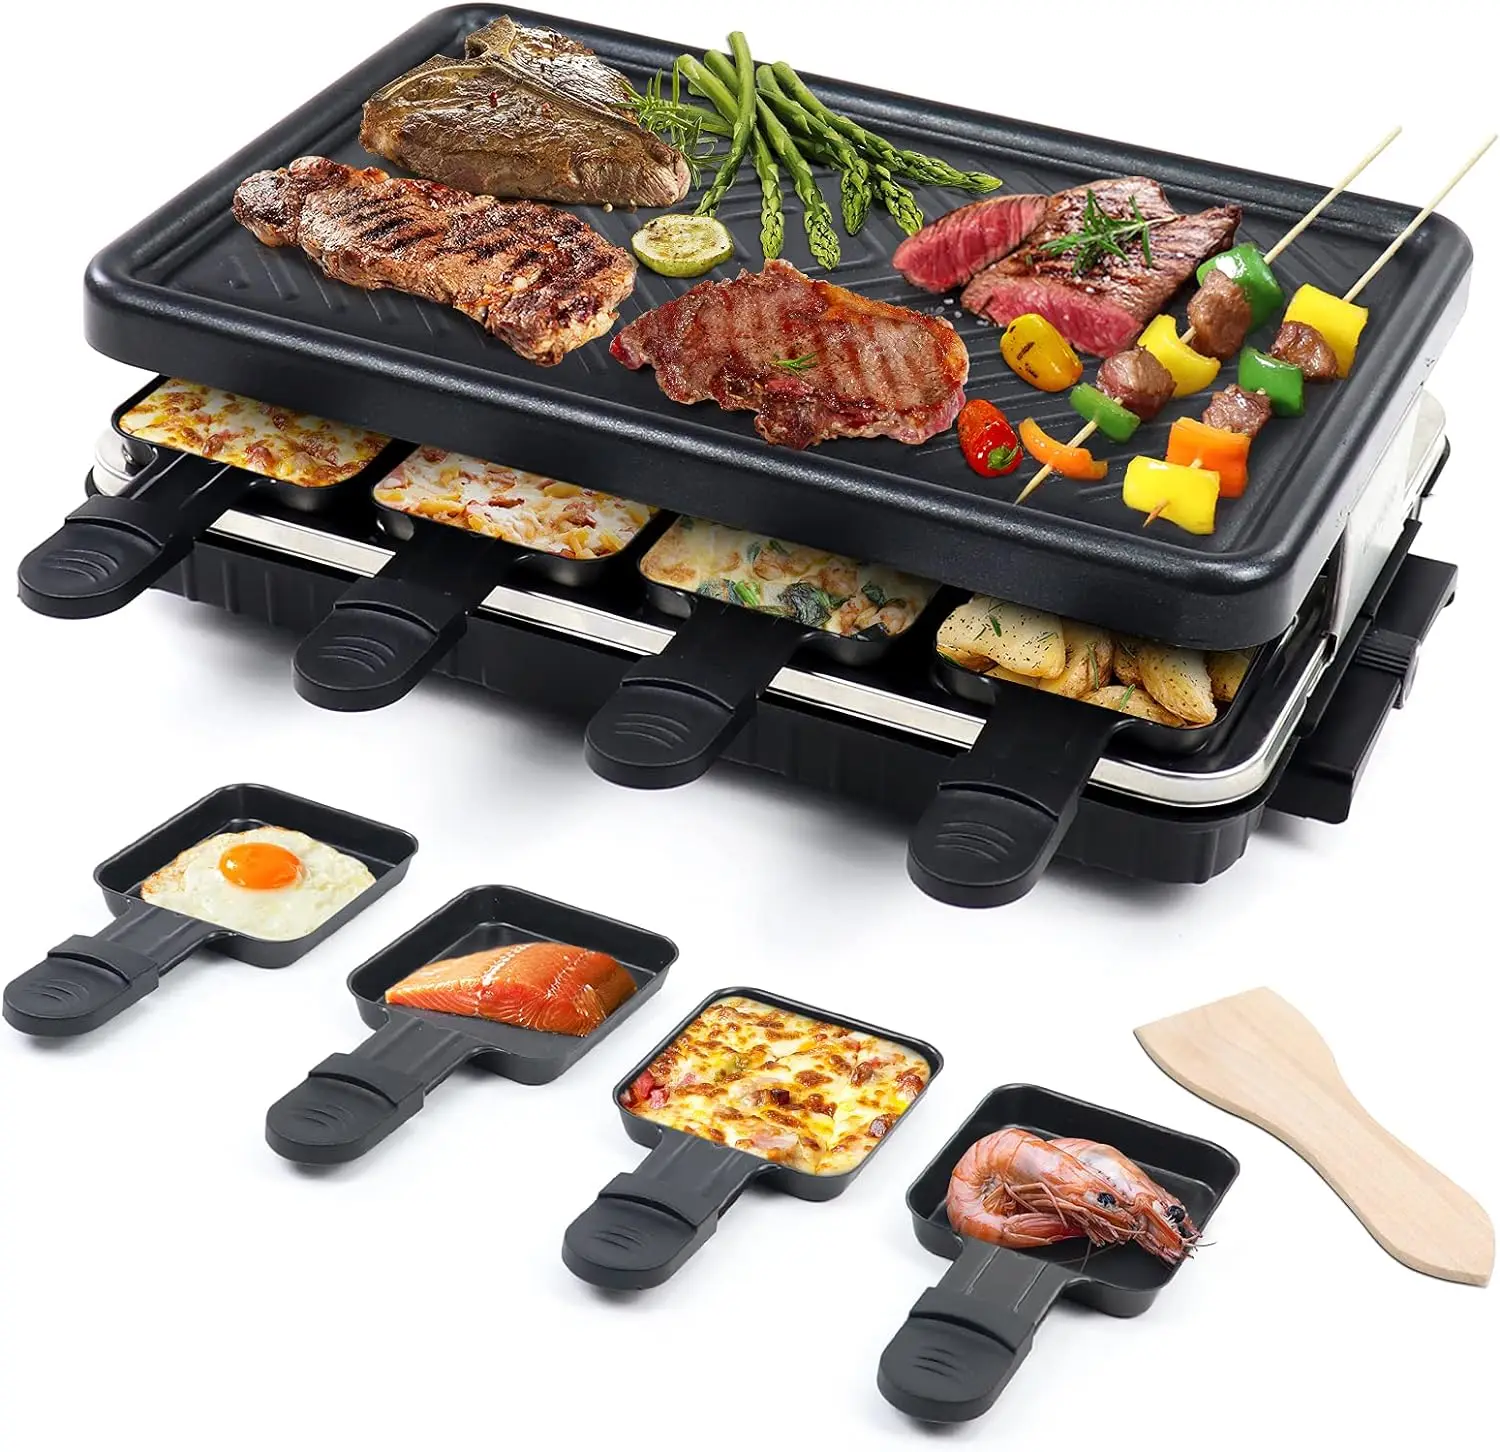 

Table Grill Smokeless Korean BBQ Grill Indoor with 8 Non-Stick Barbecue Cheese Melt Pans Temperature & Dishwasher Safe 130 Dee